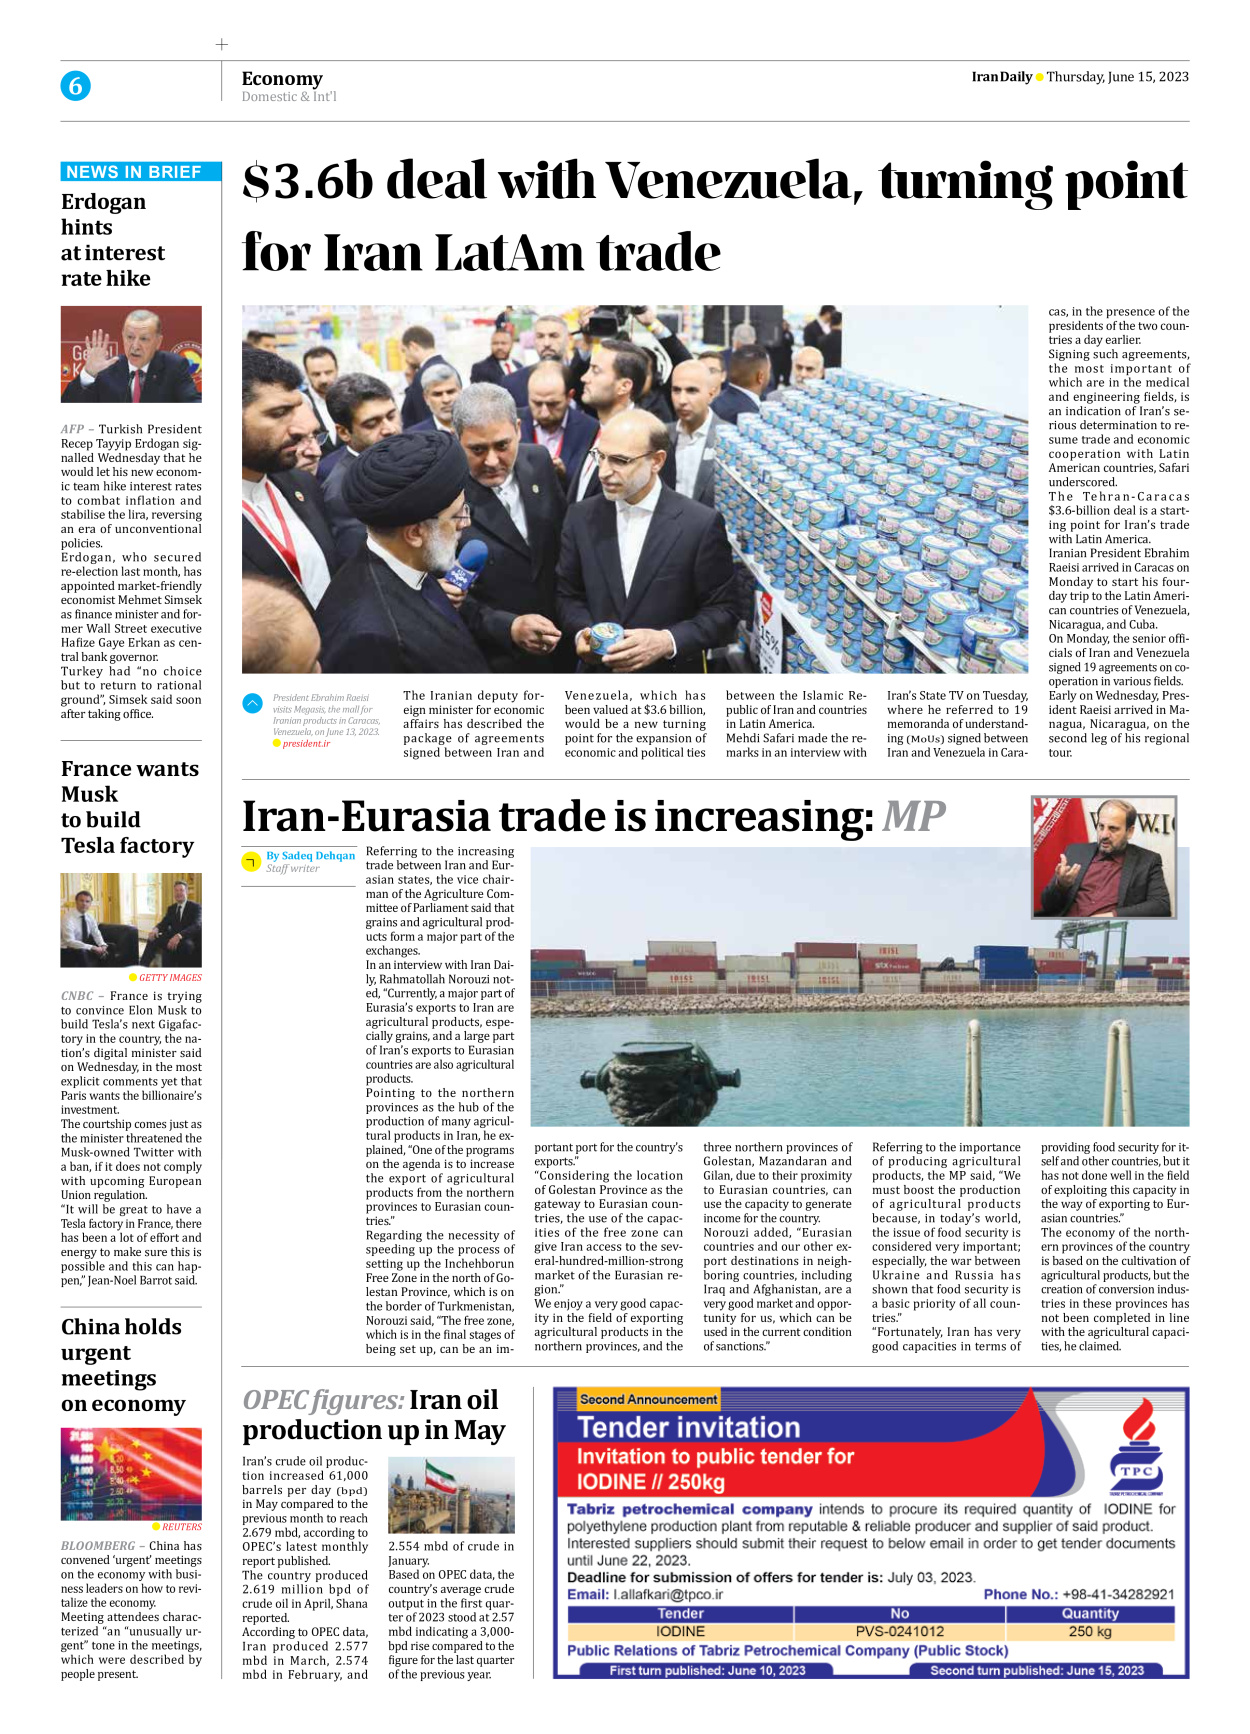 Iran Daily - Number Seven Thousand Three Hundred and Fifteen - 15 June 2023 - Page 6